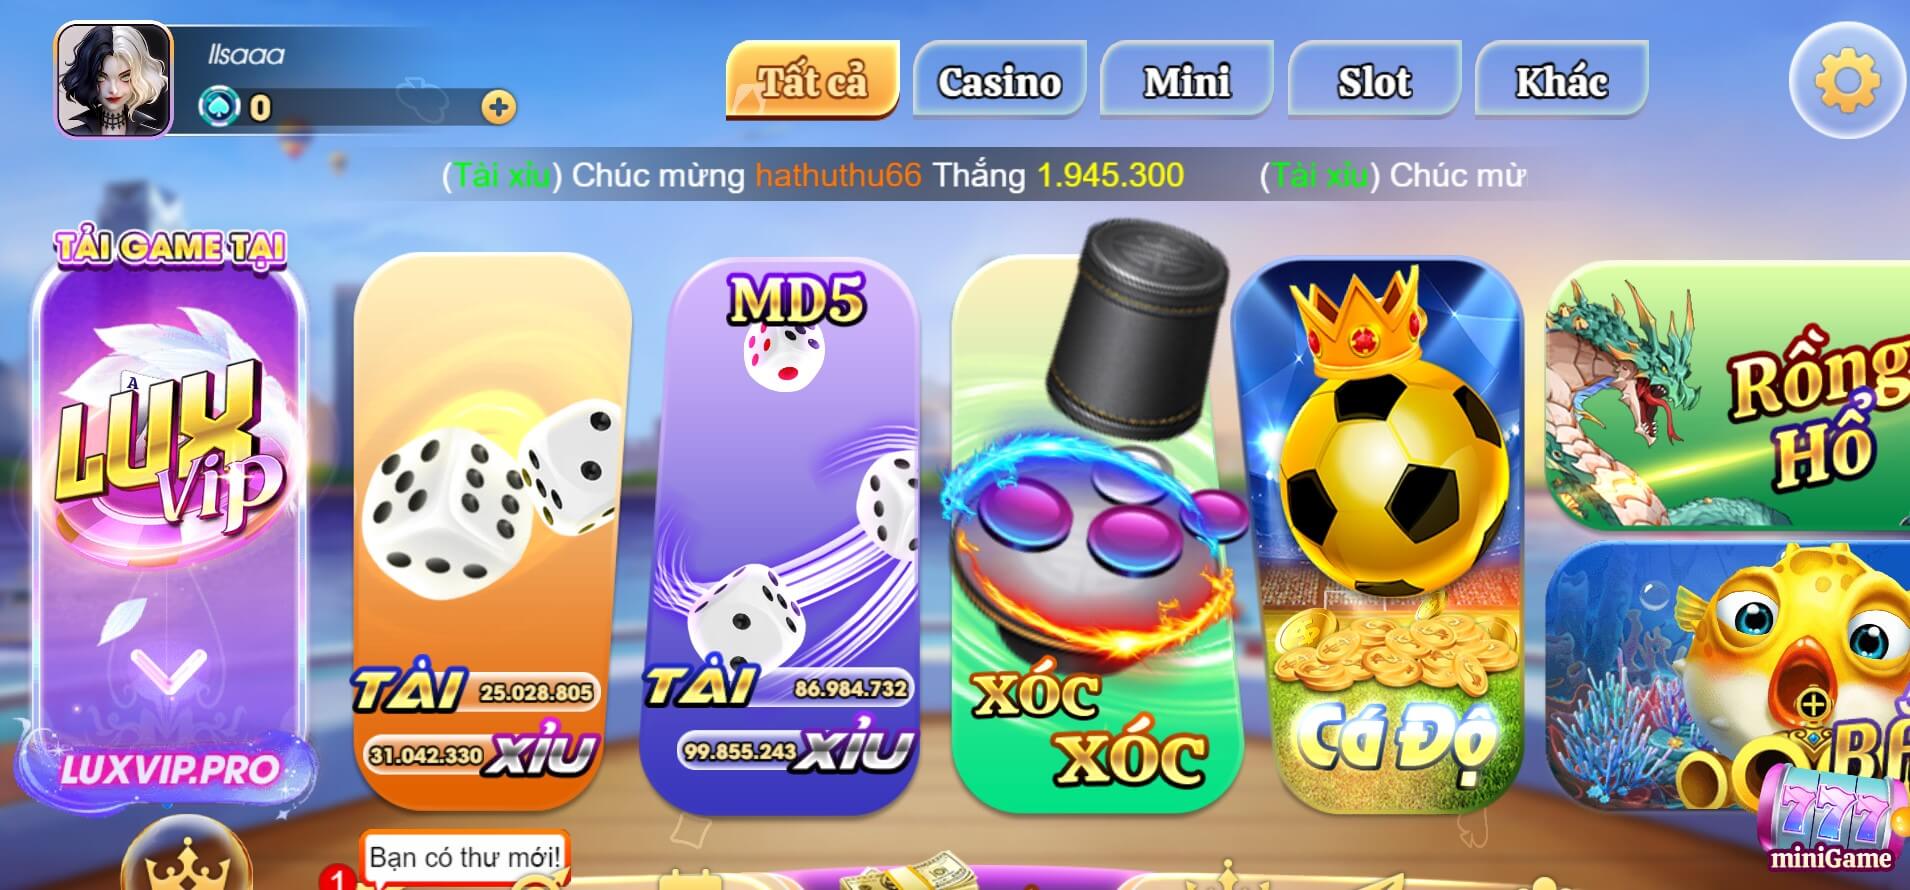 Lux52 | Giao diện bắt mắt, tải app Lux52 APK IOS Android - Ảnh 2